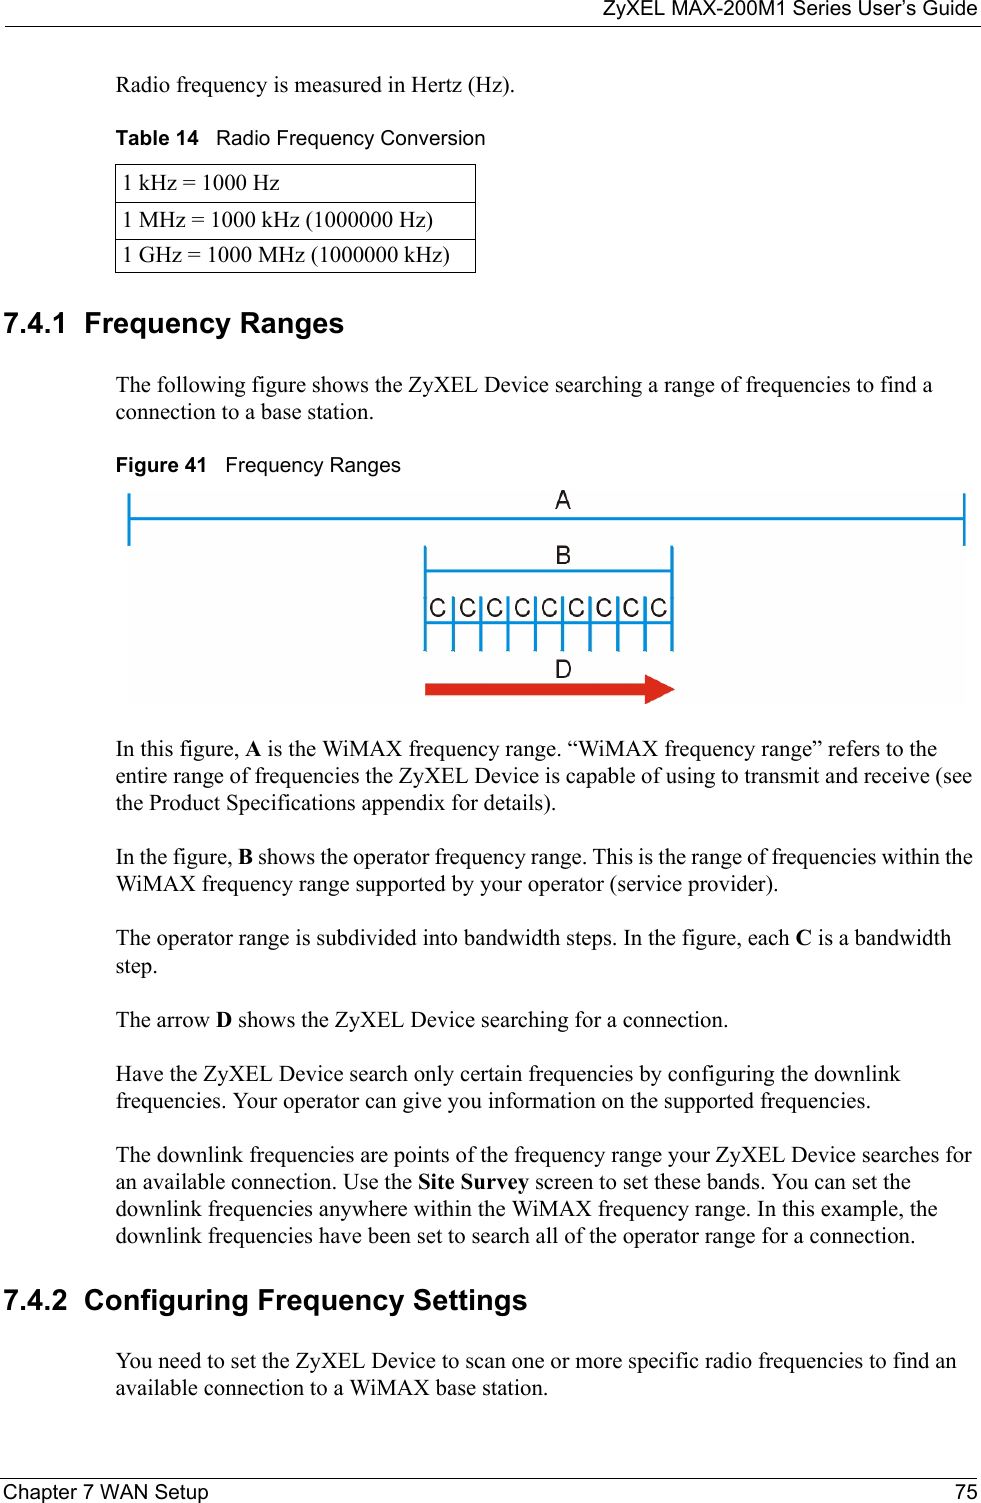 ZyXEL MAX-200M1 Series User’s GuideChapter 7 WAN Setup 75Radio frequency is measured in Hertz (Hz). 7.4.1  Frequency RangesThe following figure shows the ZyXEL Device searching a range of frequencies to find a connection to a base station.  Figure 41   Frequency RangesIn this figure, A is the WiMAX frequency range. “WiMAX frequency range” refers to the entire range of frequencies the ZyXEL Device is capable of using to transmit and receive (see the Product Specifications appendix for details). In the figure, B shows the operator frequency range. This is the range of frequencies within the WiMAX frequency range supported by your operator (service provider).The operator range is subdivided into bandwidth steps. In the figure, each C is a bandwidth step.The arrow D shows the ZyXEL Device searching for a connection.Have the ZyXEL Device search only certain frequencies by configuring the downlink frequencies. Your operator can give you information on the supported frequencies. The downlink frequencies are points of the frequency range your ZyXEL Device searches for an available connection. Use the Site Survey screen to set these bands. You can set the downlink frequencies anywhere within the WiMAX frequency range. In this example, the downlink frequencies have been set to search all of the operator range for a connection.7.4.2  Configuring Frequency SettingsYou need to set the ZyXEL Device to scan one or more specific radio frequencies to find an available connection to a WiMAX base station. Table 14   Radio Frequency Conversion1 kHz = 1000 Hz1 MHz = 1000 kHz (1000000 Hz)1 GHz = 1000 MHz (1000000 kHz)